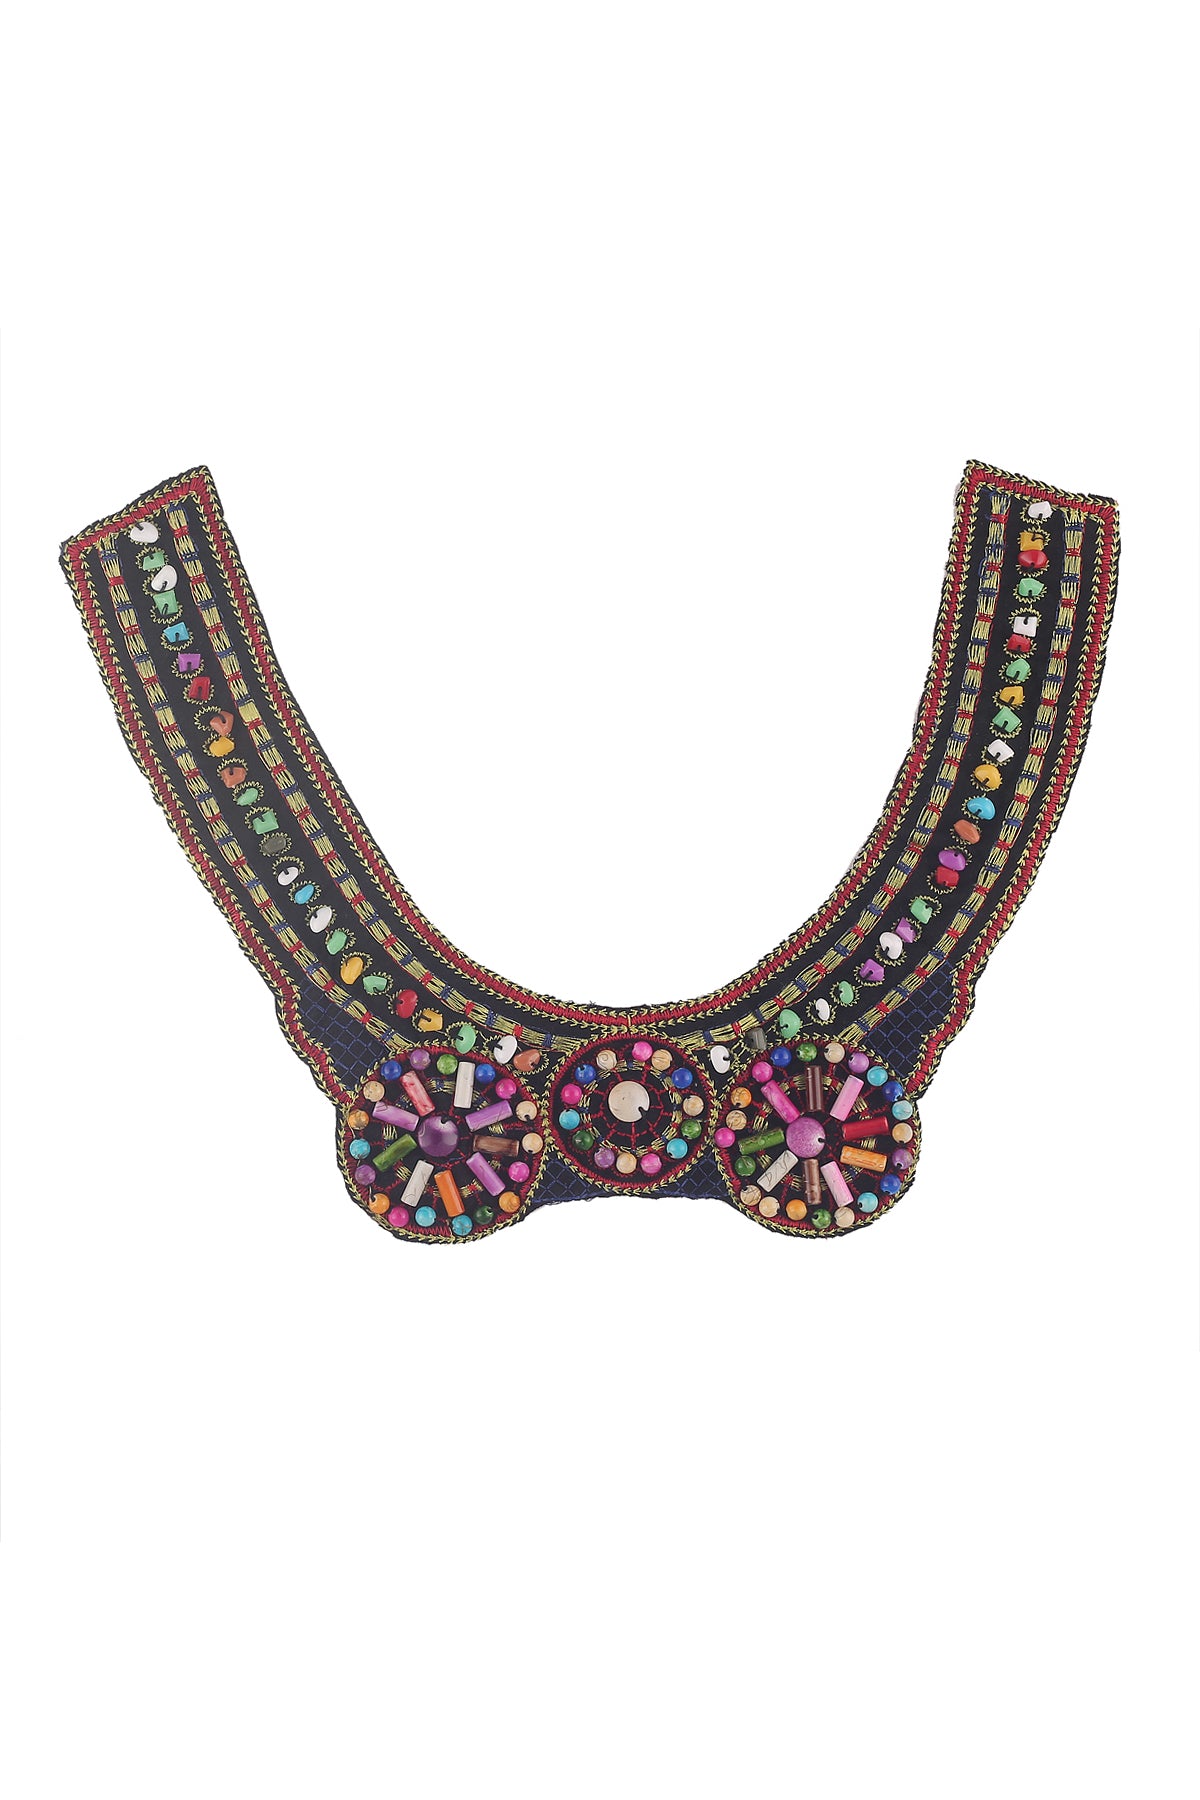 Fashion Embroidery Beading Neck Trim for Women's Clothing